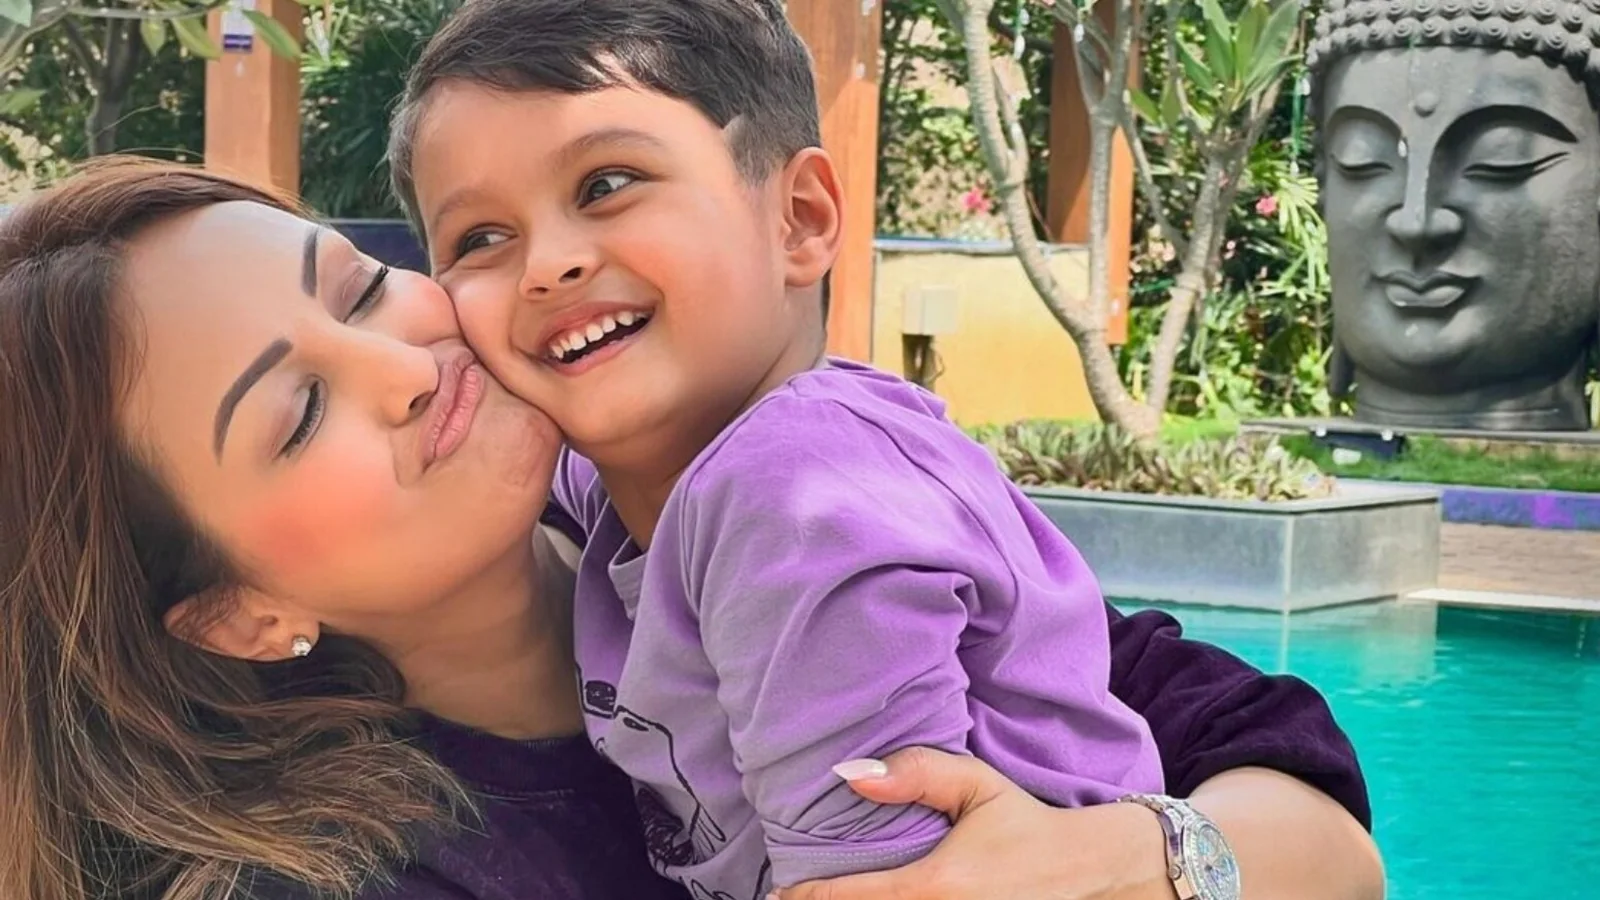 Nisha Rawal reveals consulting therapists for son Kavish after split with Karan Mehra: ‘Need to see if he’s in trauma’